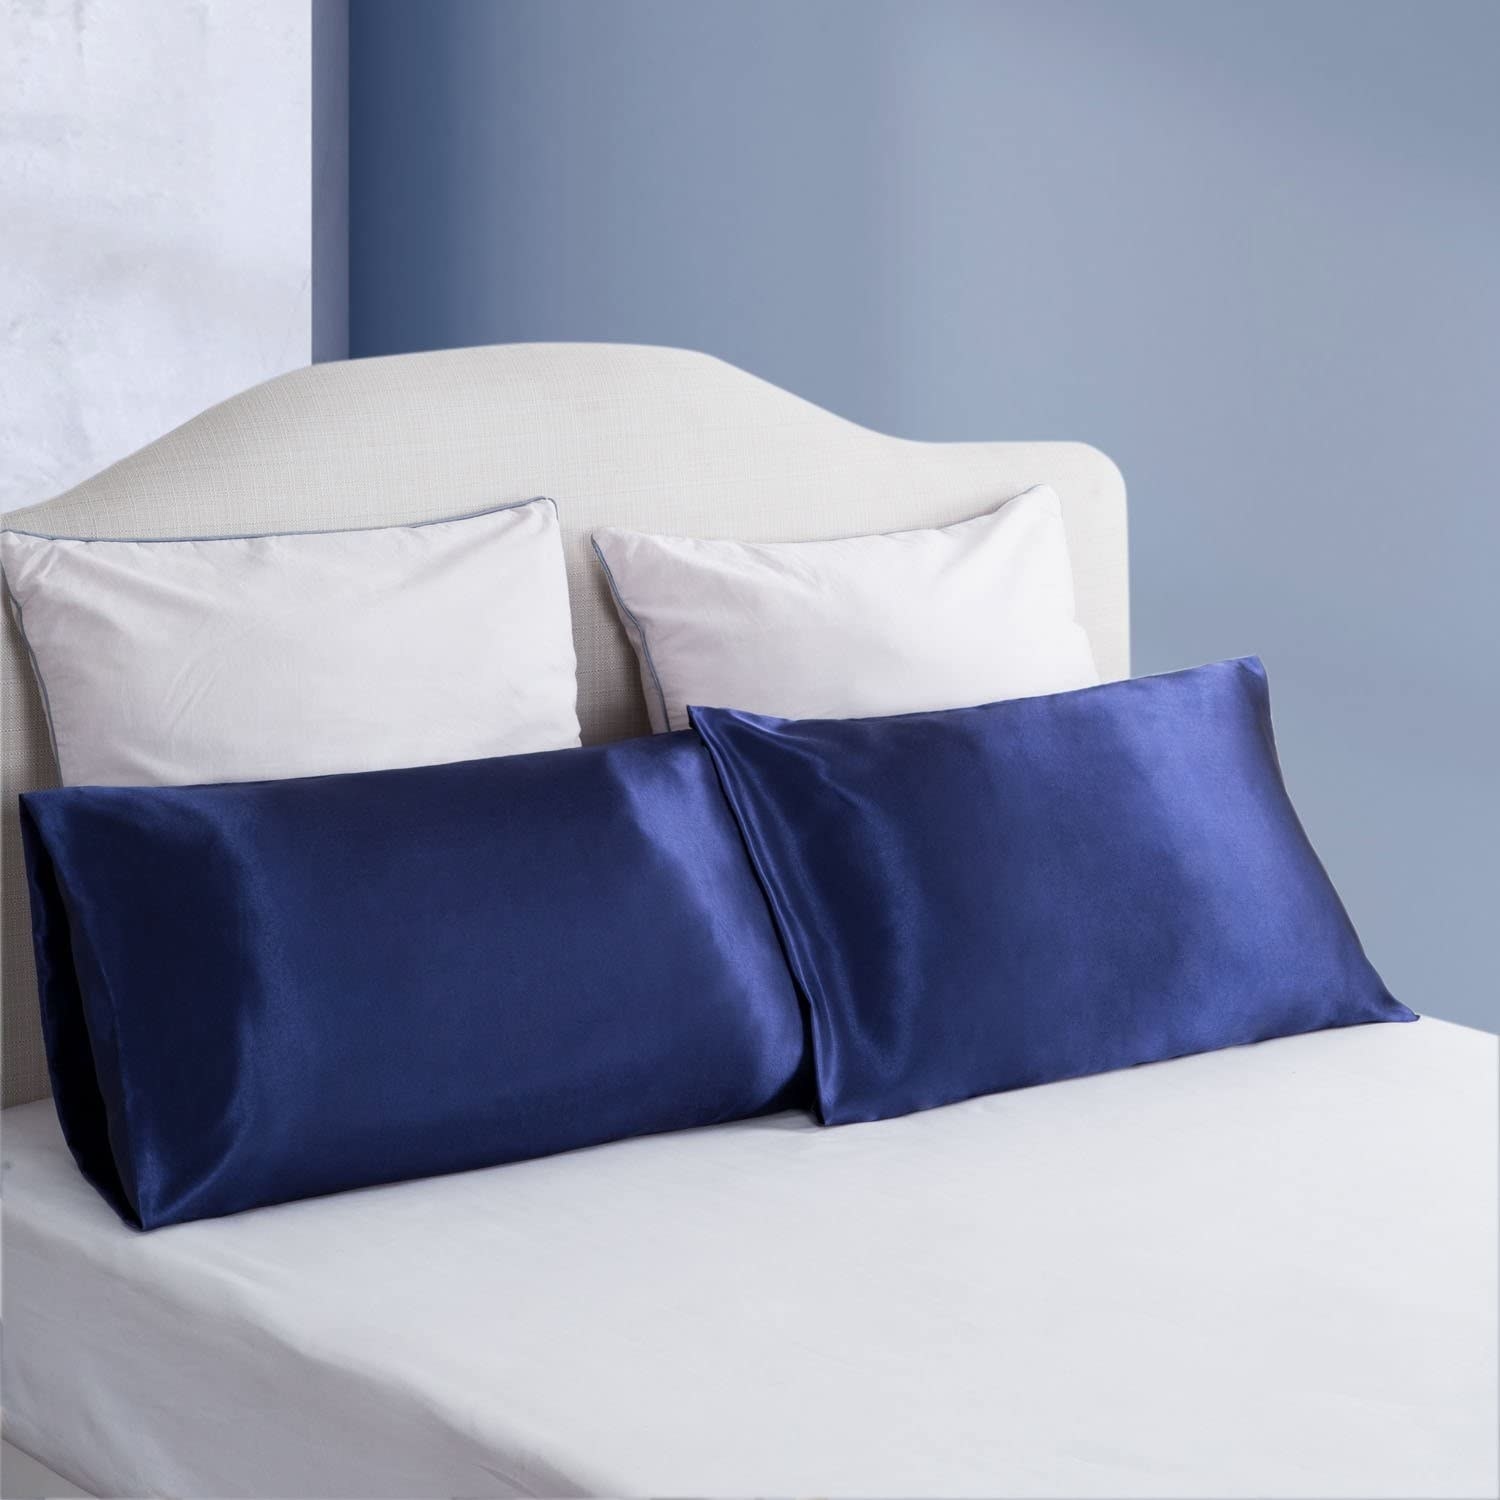 The pillowcases in navy